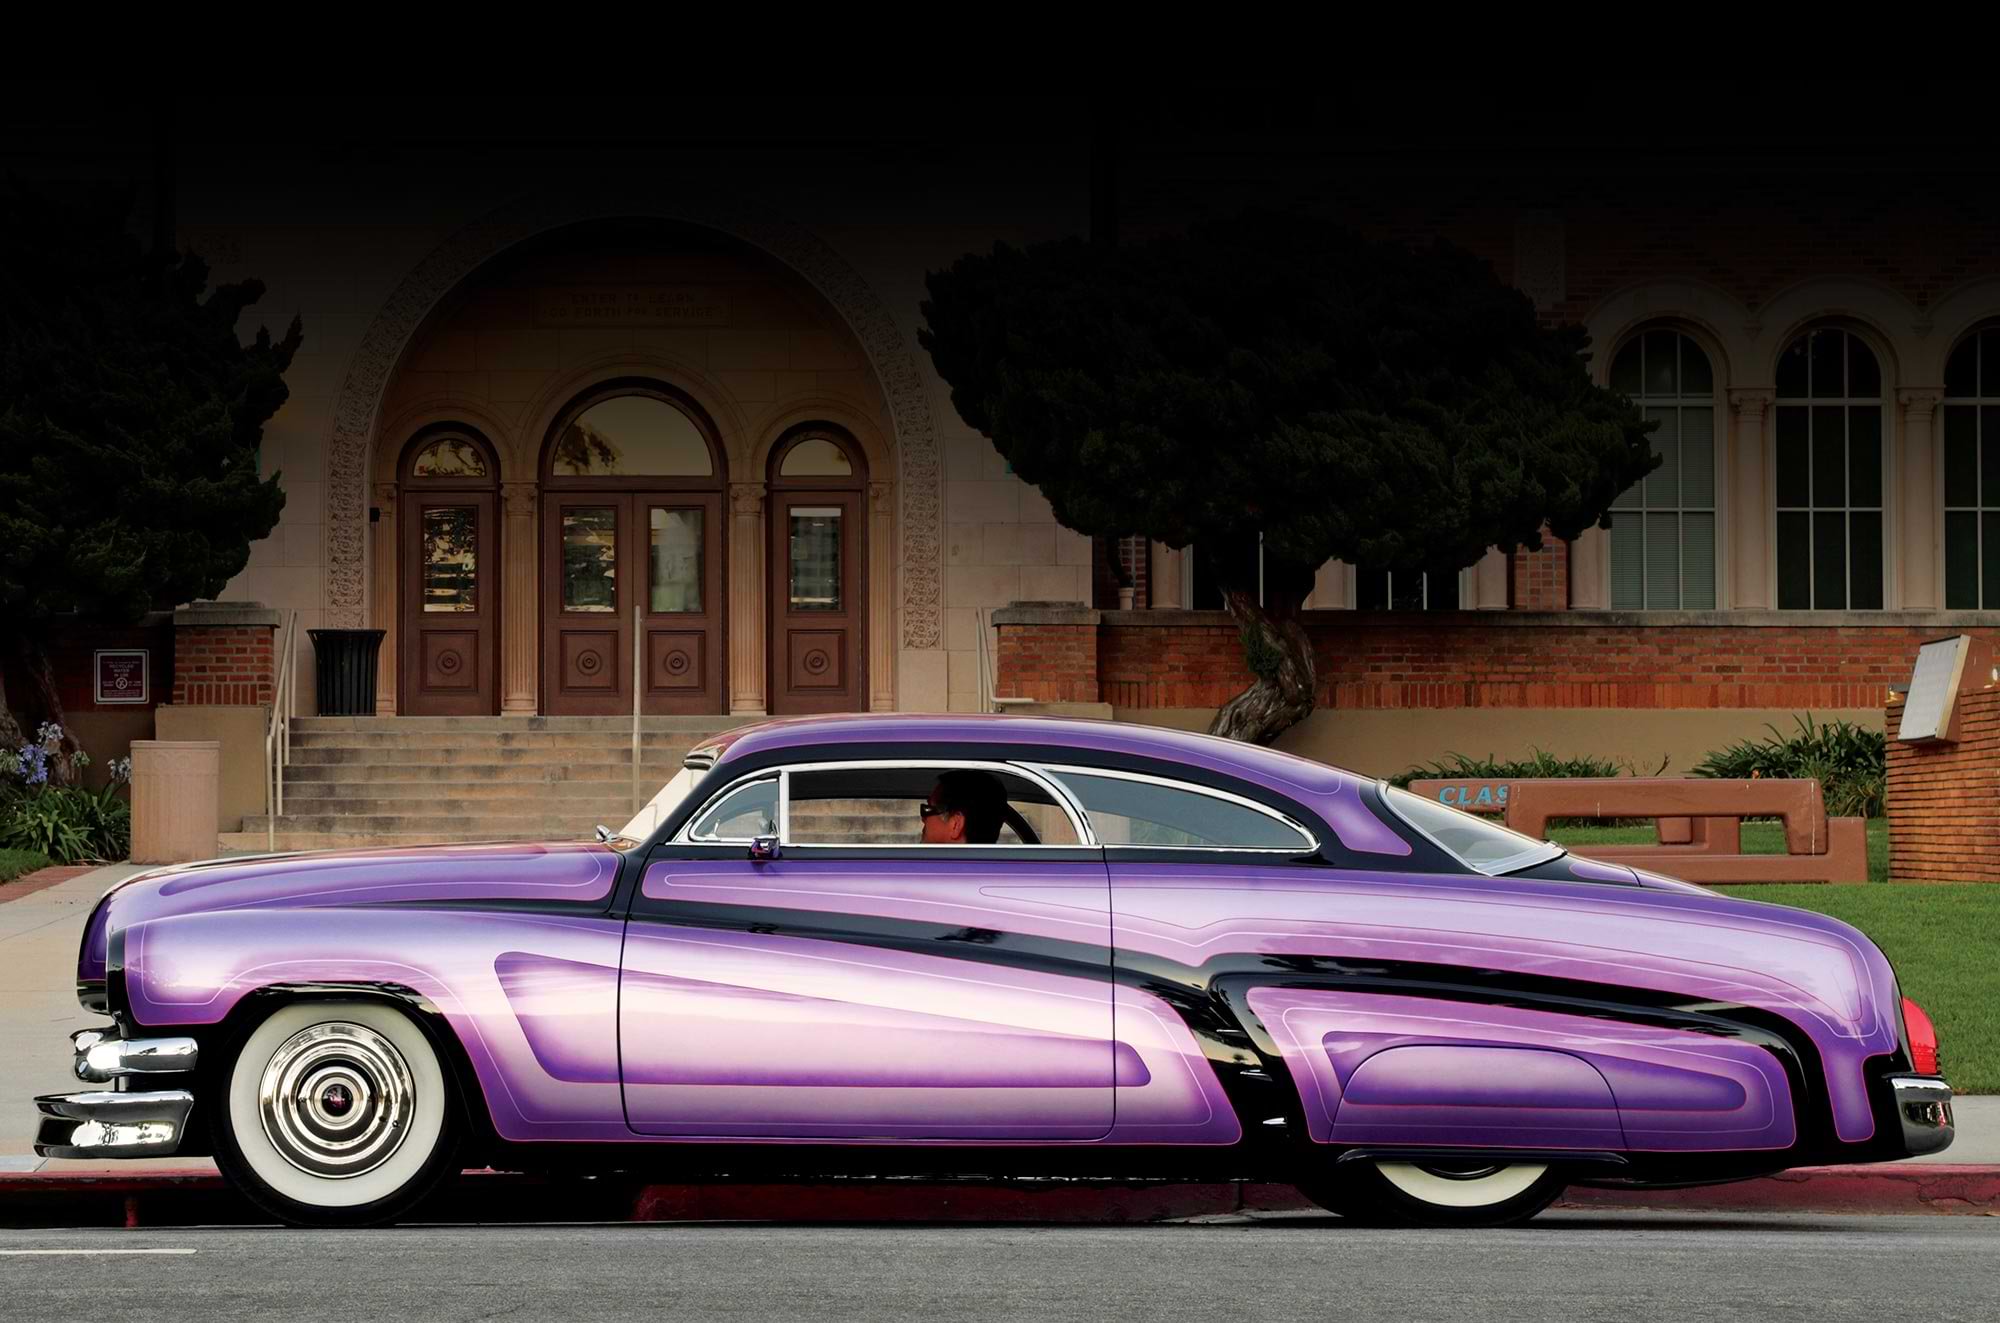 driver side profile of the custom vibrant purple ’51 Mercury parked in front of a dated red brick building